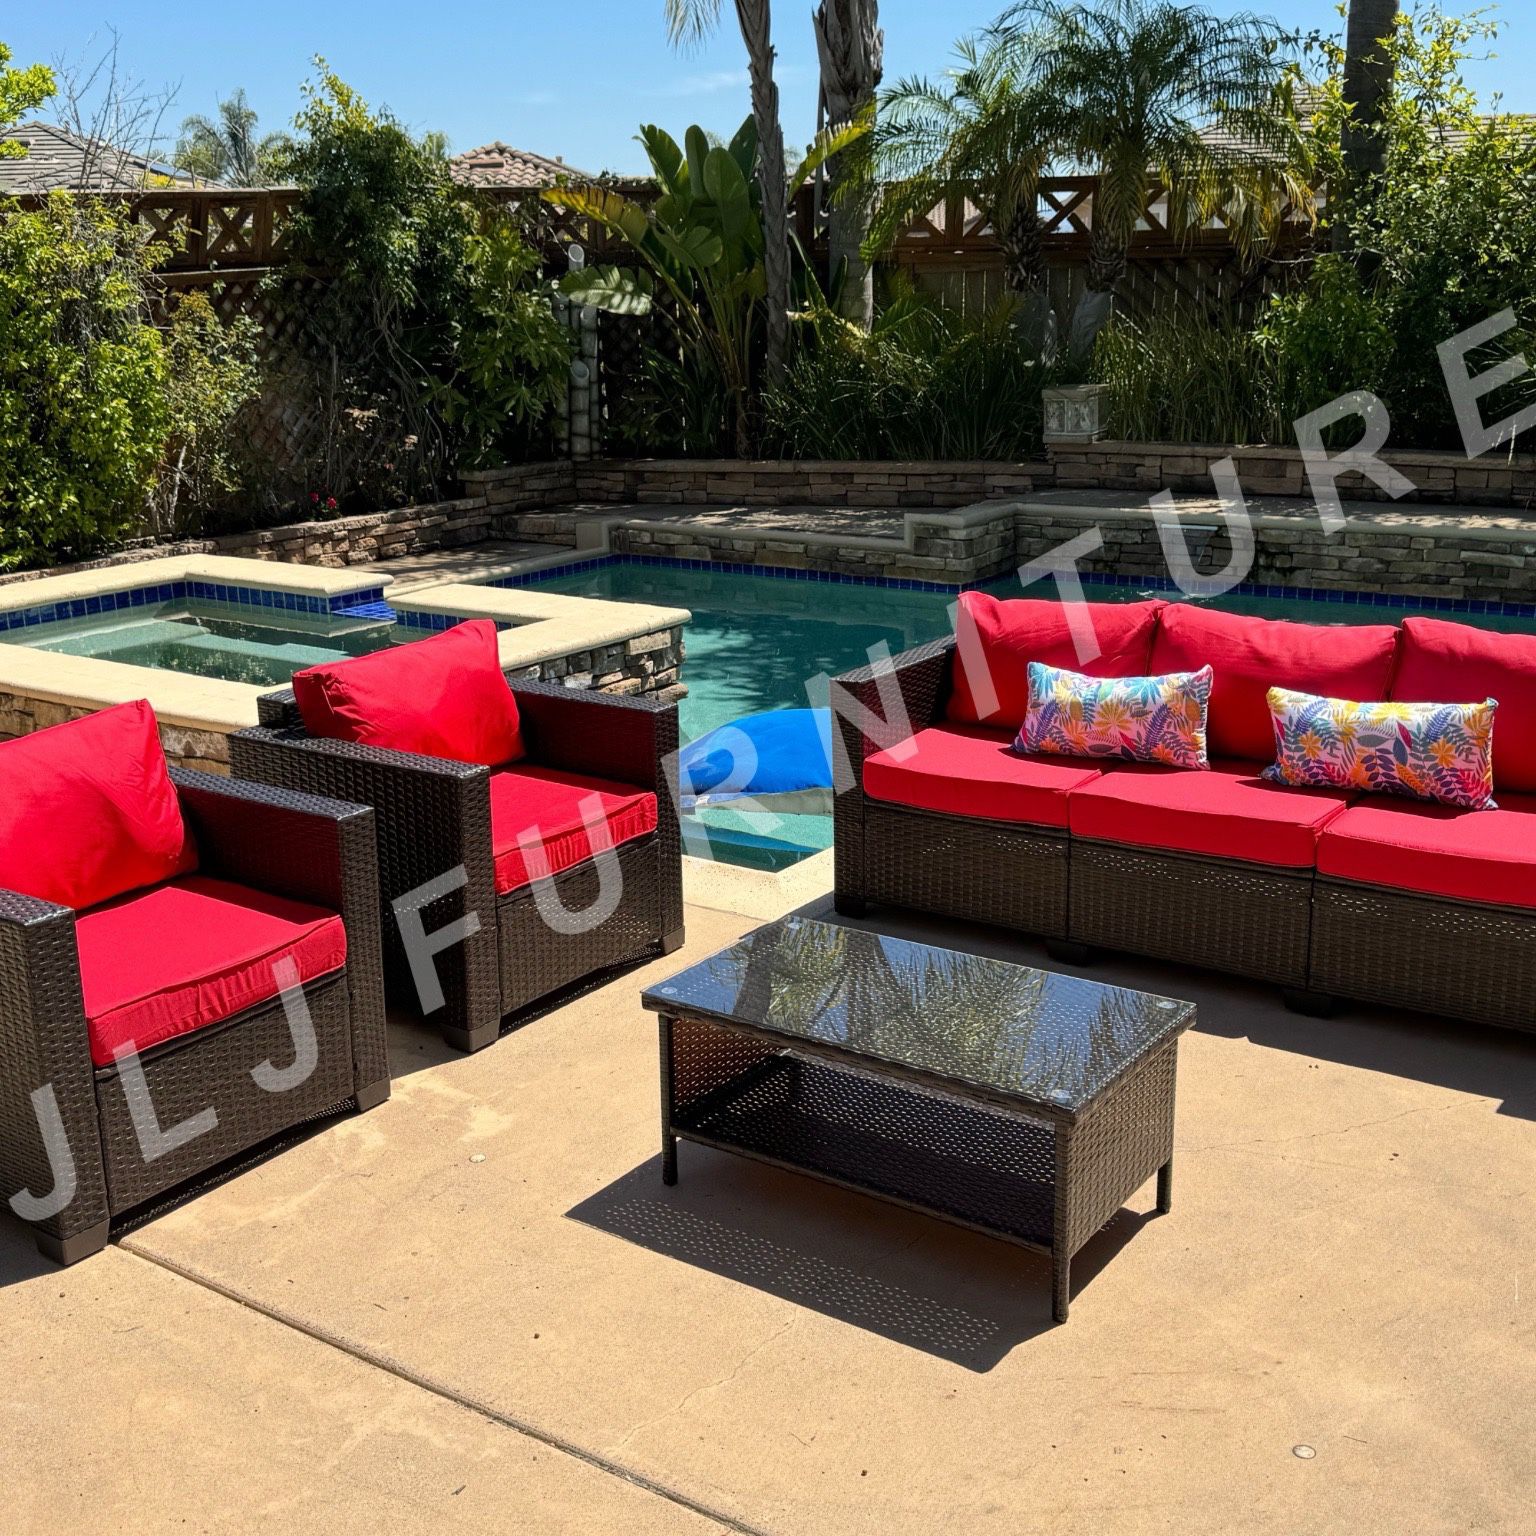 NEW🔥Outdoor Patio Furniture 4 Pc Brown Wicker Red Cushions Conversation Set ASSEMBLED